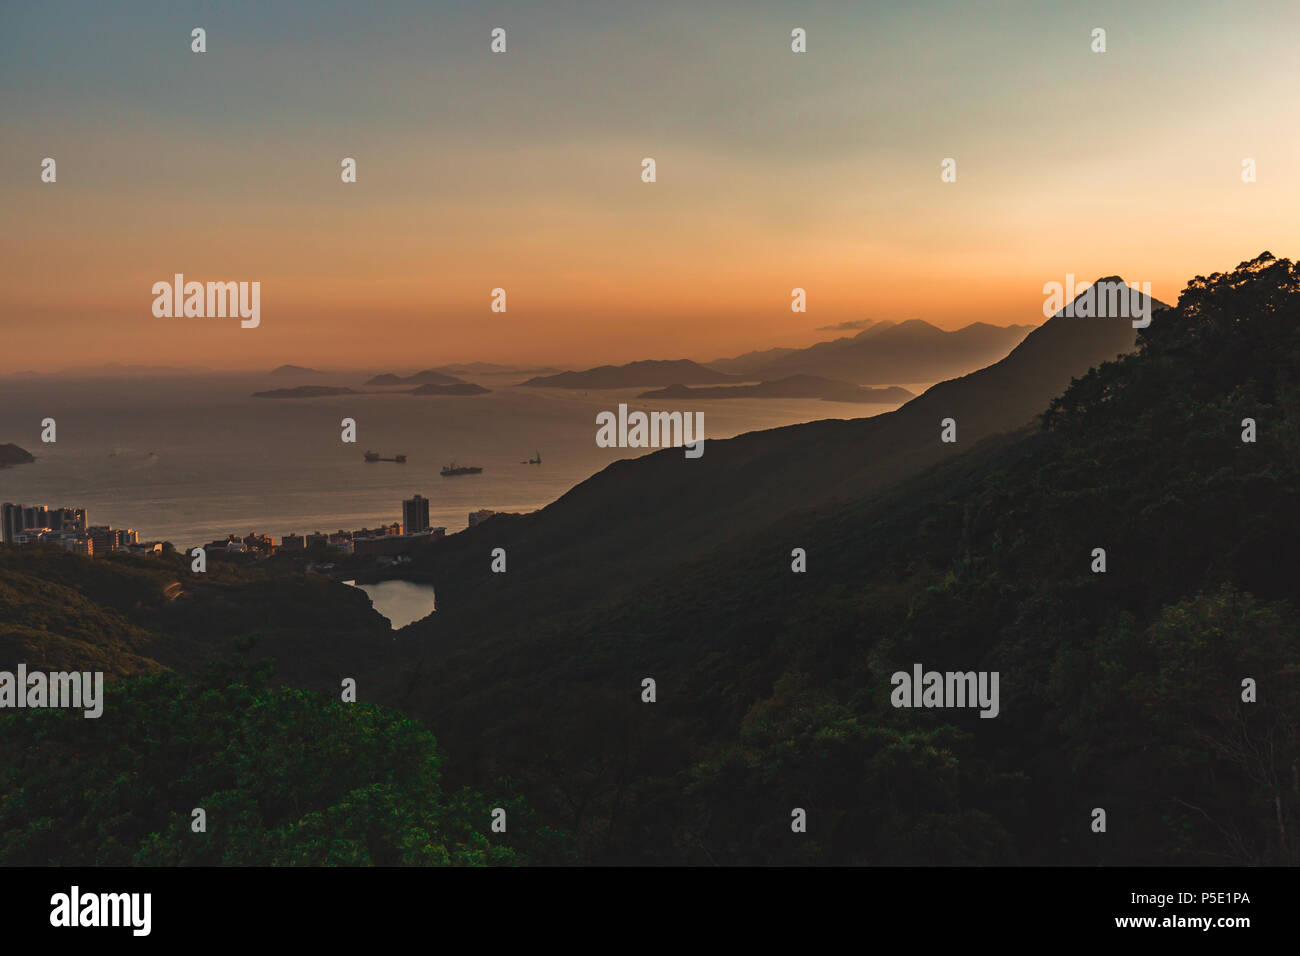 Mountains and islands view around Hong Kong at sunset Stock Photo